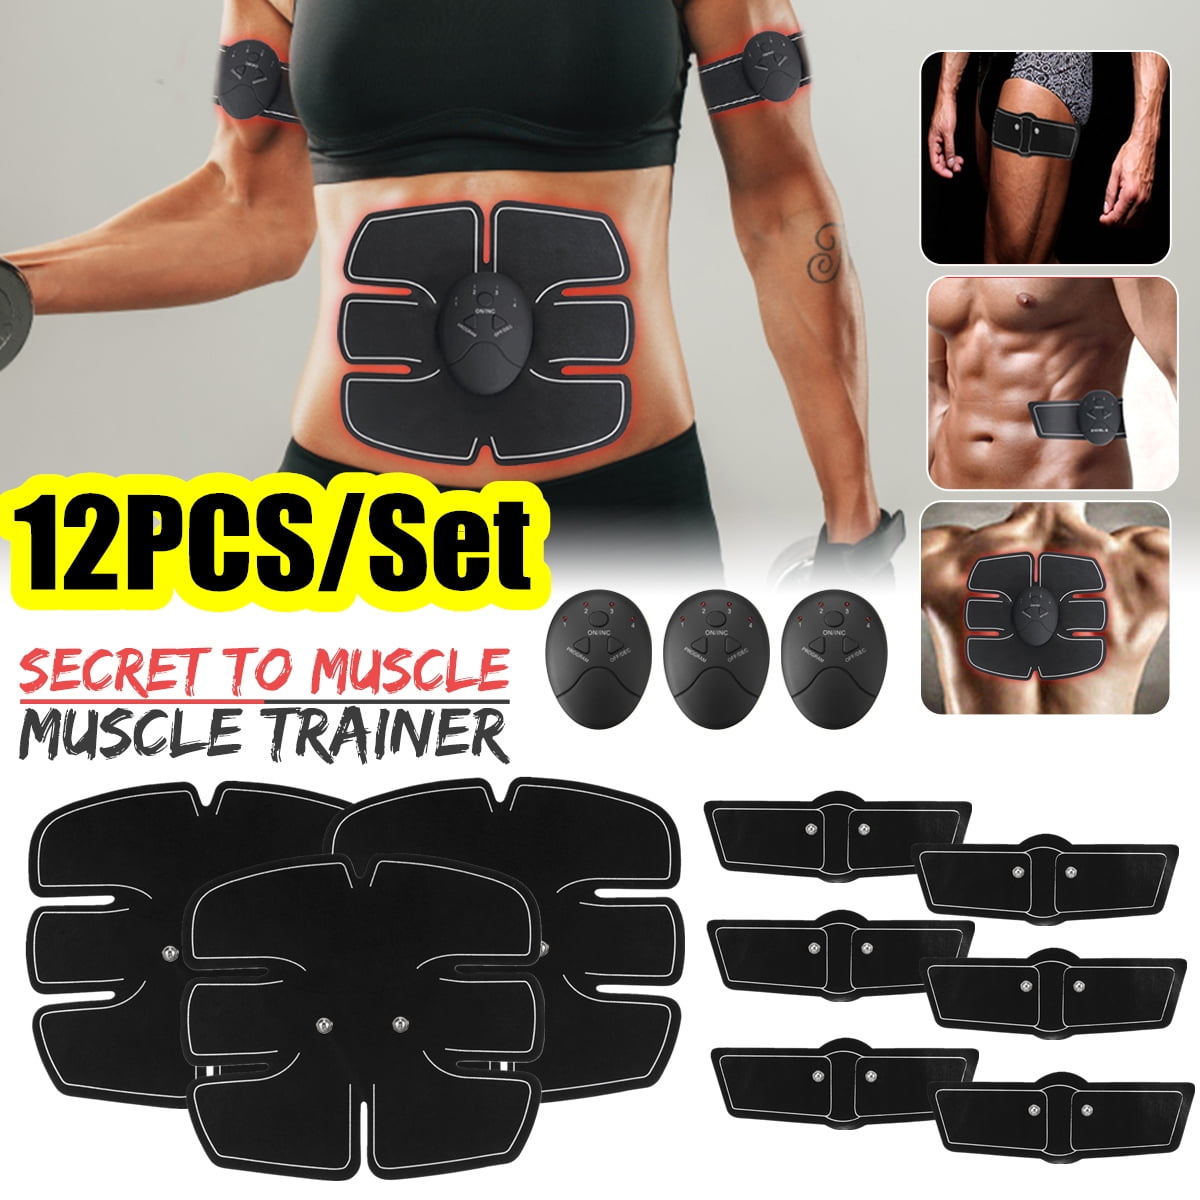 Details about   Abdominal Muscle Training Gear Hip Trainer Buttocks Lifter Fitness Full Body CA 